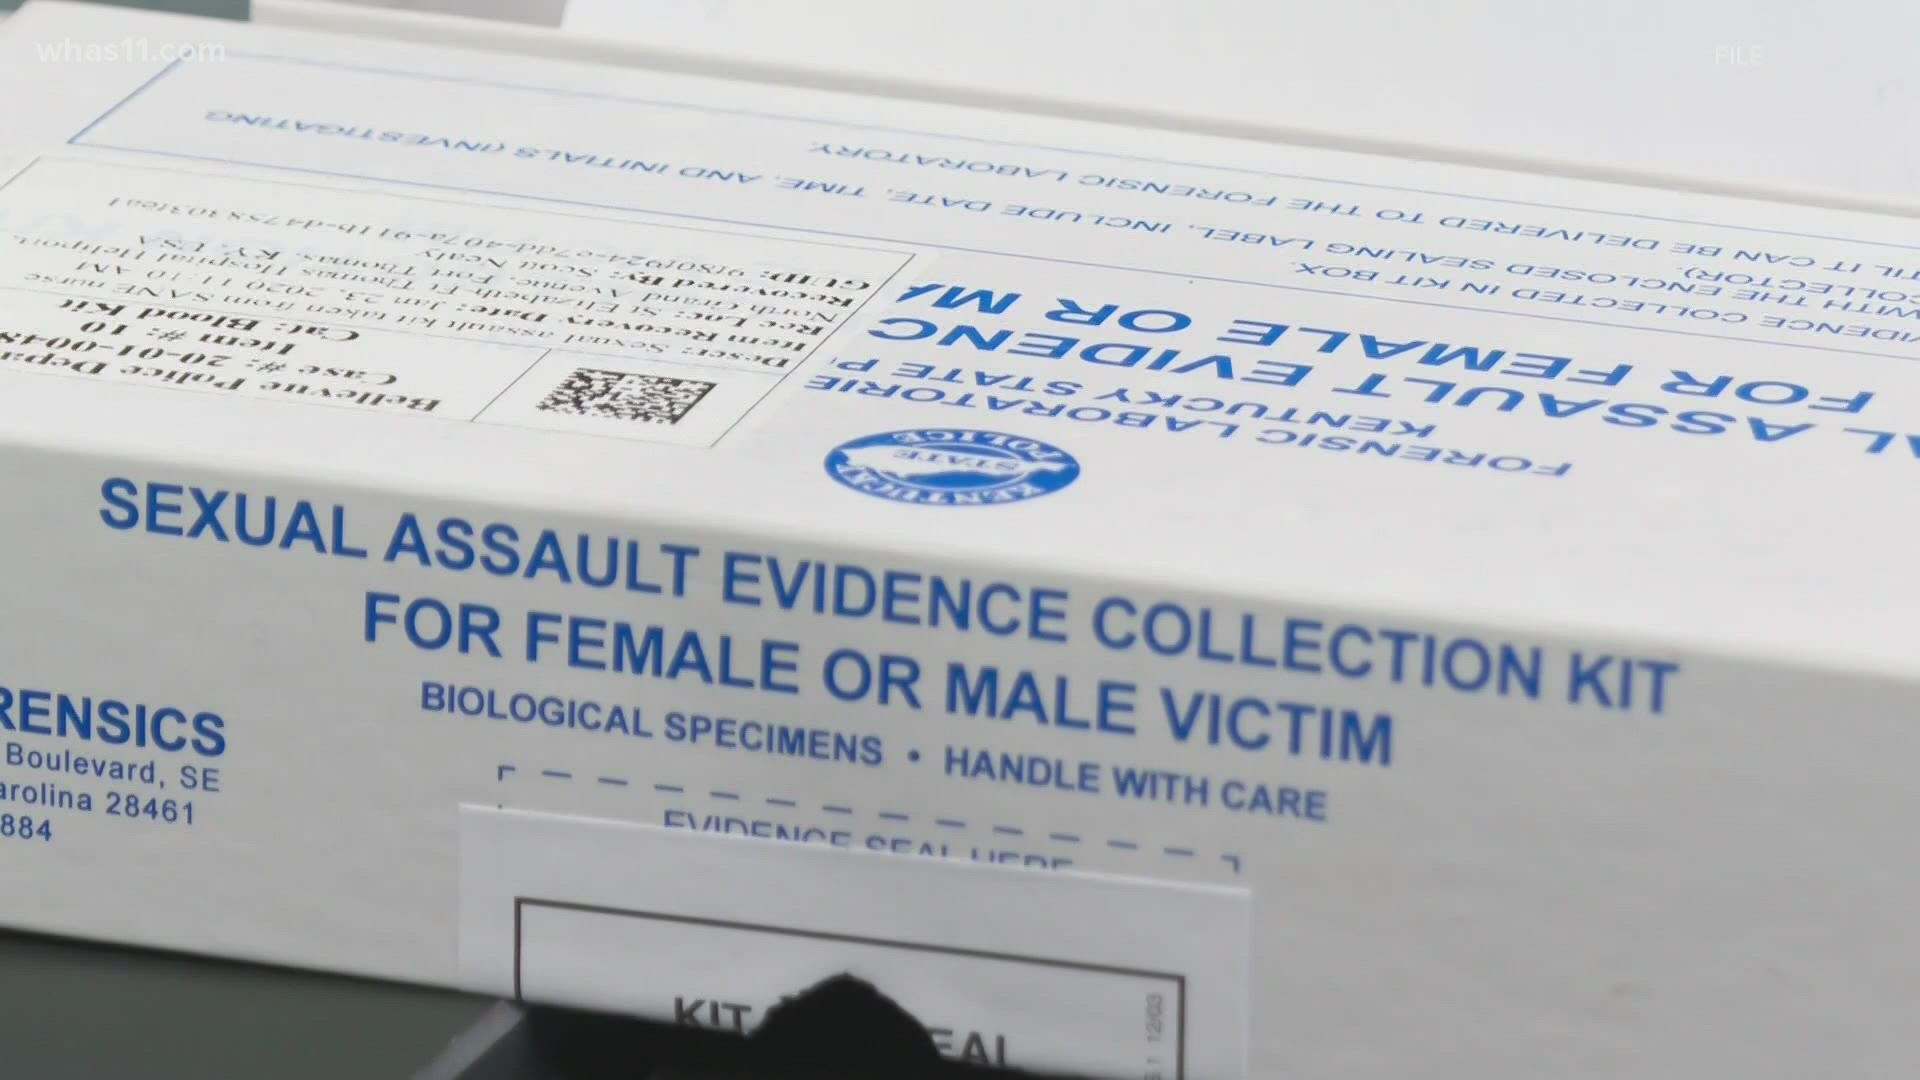 A WHAS11 survey of Kentucky healthcare workers found one sexual assault survivor's struggle to get a forensic exam was not an isolated incident.